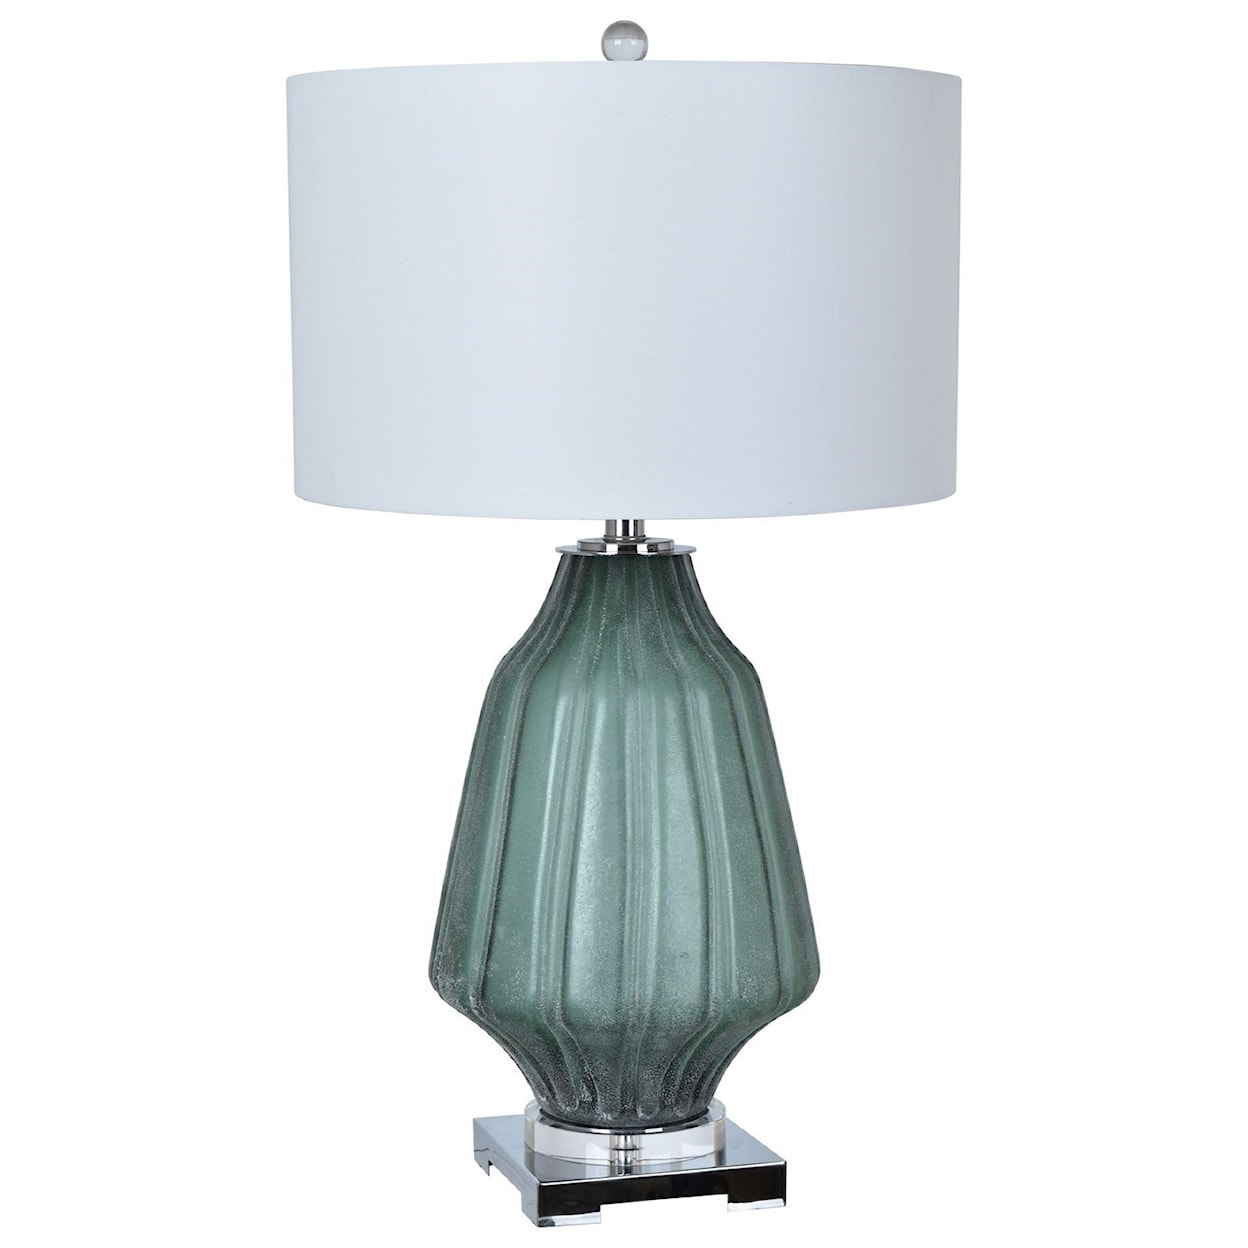 Crestview Collection Lighting Dara Table Lamp